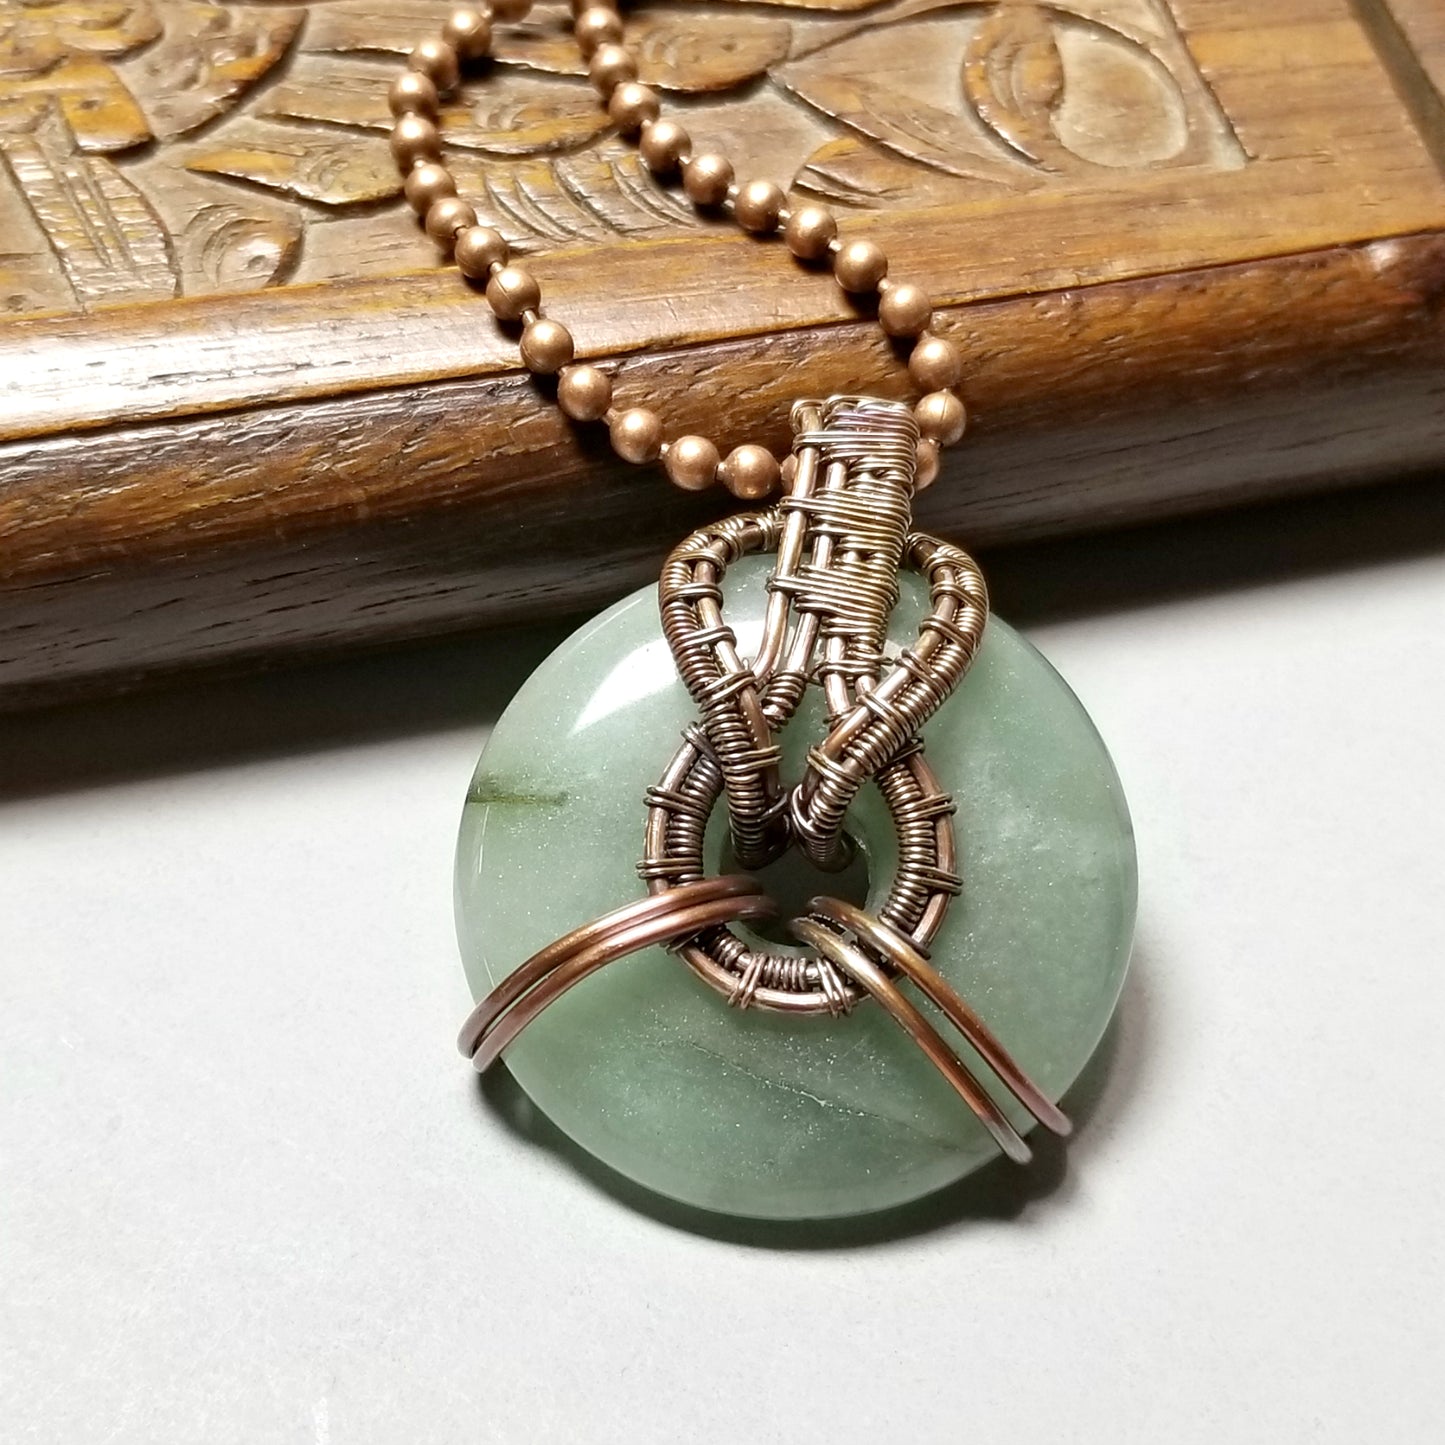 Donut Necklace, Wire Wrapped Gemstone Donut Pendant